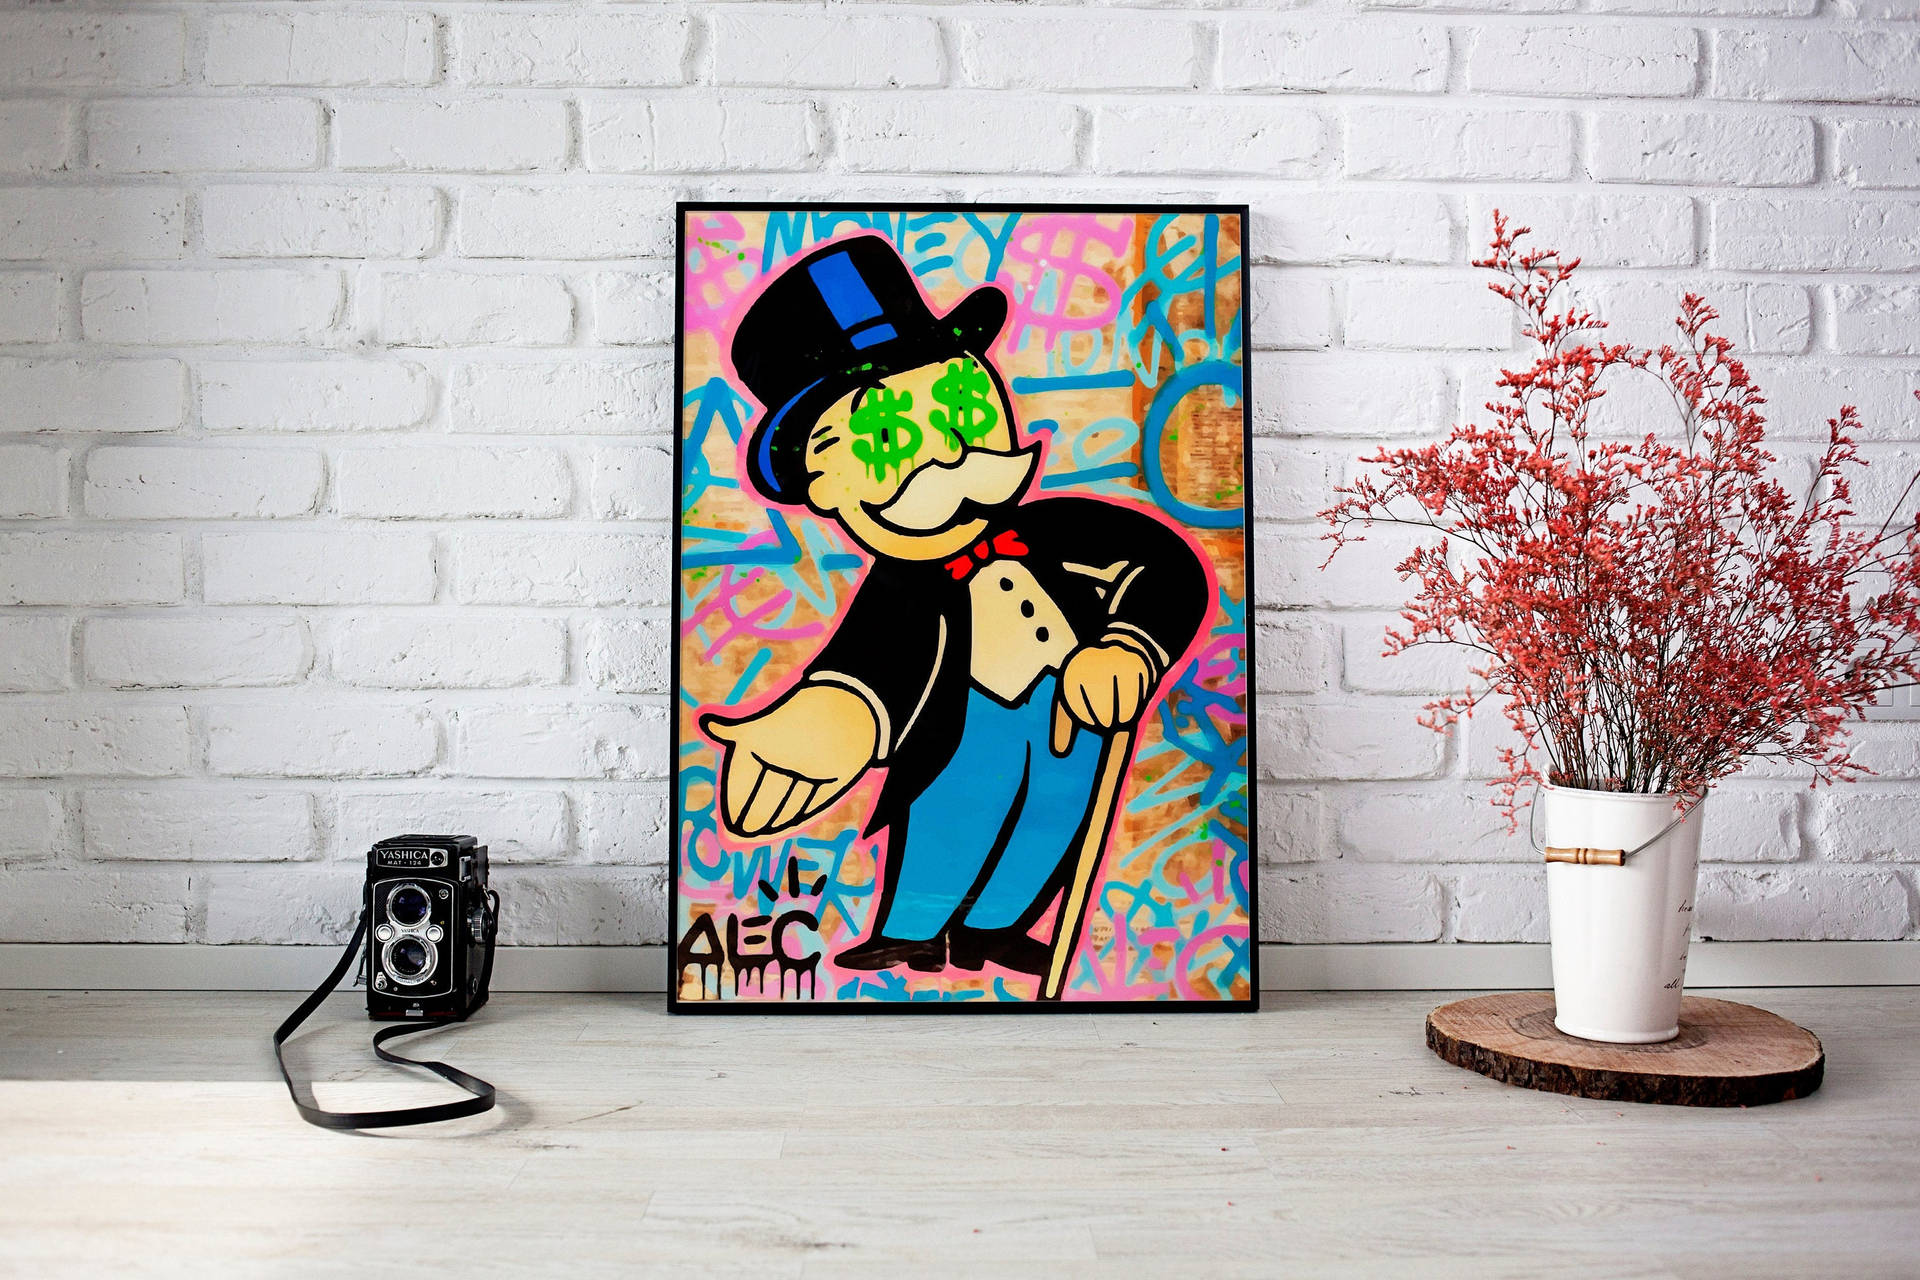 The Colourful Graffiti Art Of Monopoly Man Background